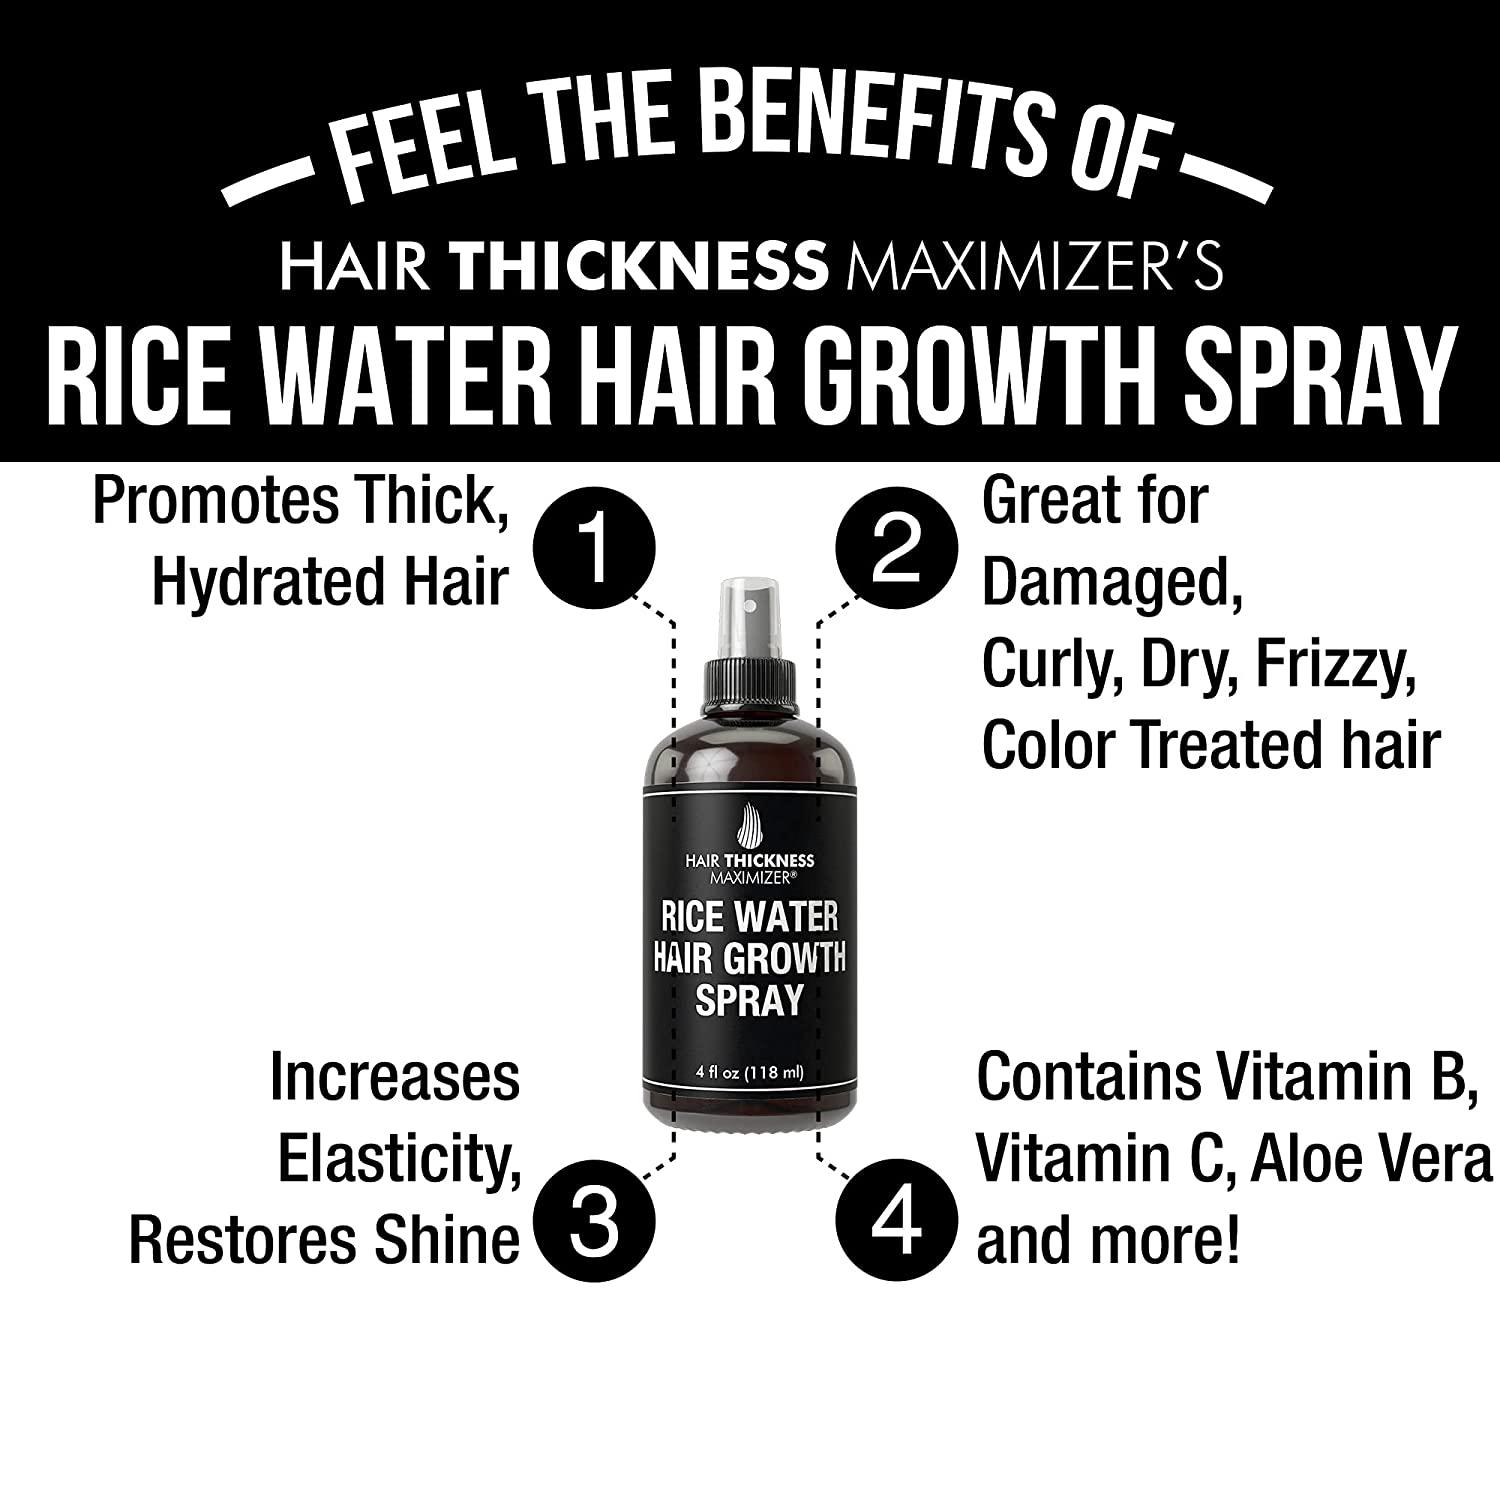 Rice Water Hair Growth Spray. Vegan Hair Thickening Moisturizing, Hydrating  Volumizer Sprays For Men, Women with Vitamin B, C, Aloe Vera. Leave in  Fermented Mist For Dry, Frizzy, Weak Hair. Unscented